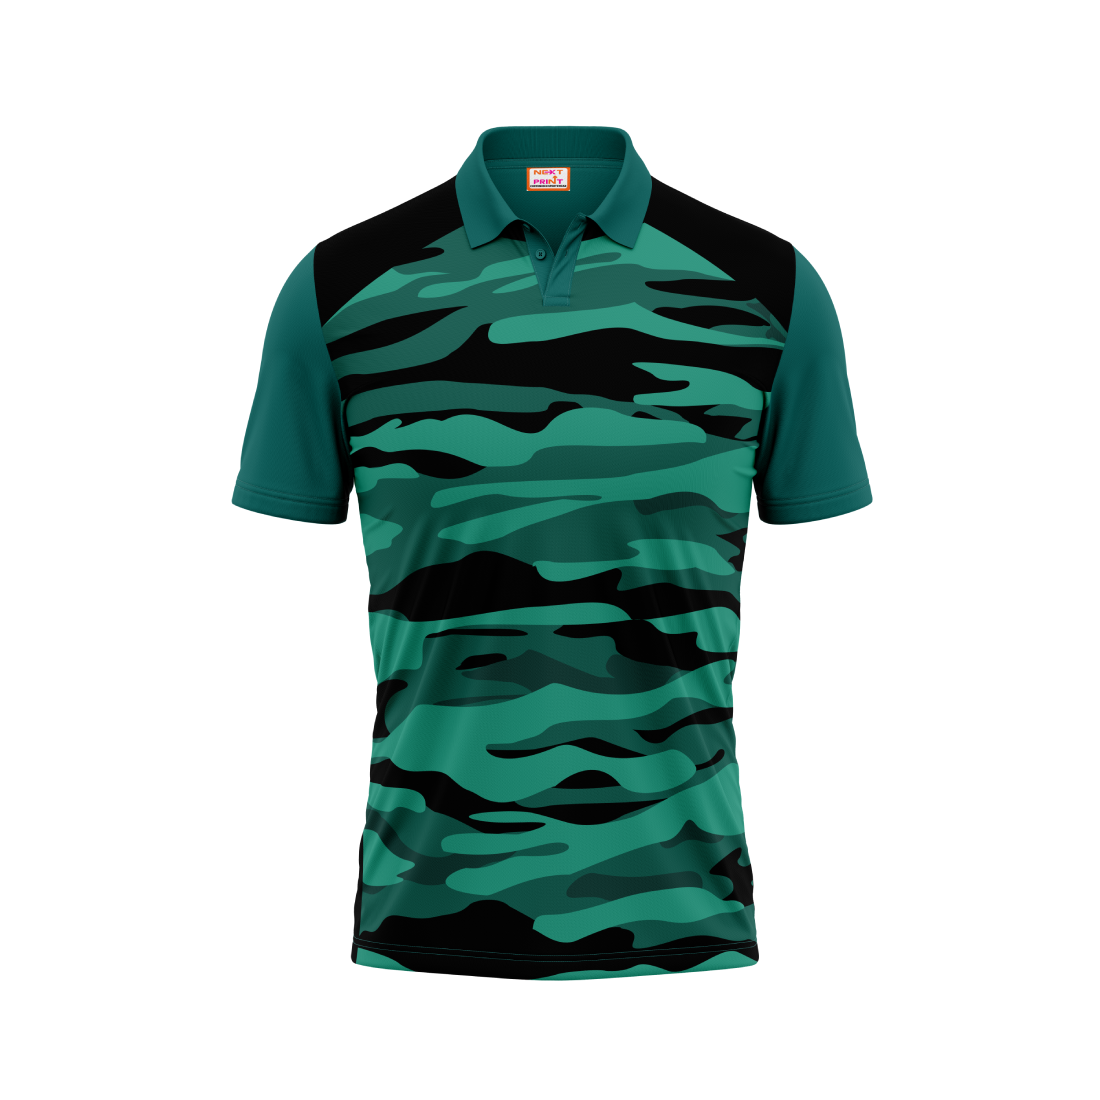 Polo Neck Printed Jersey Green NP0017